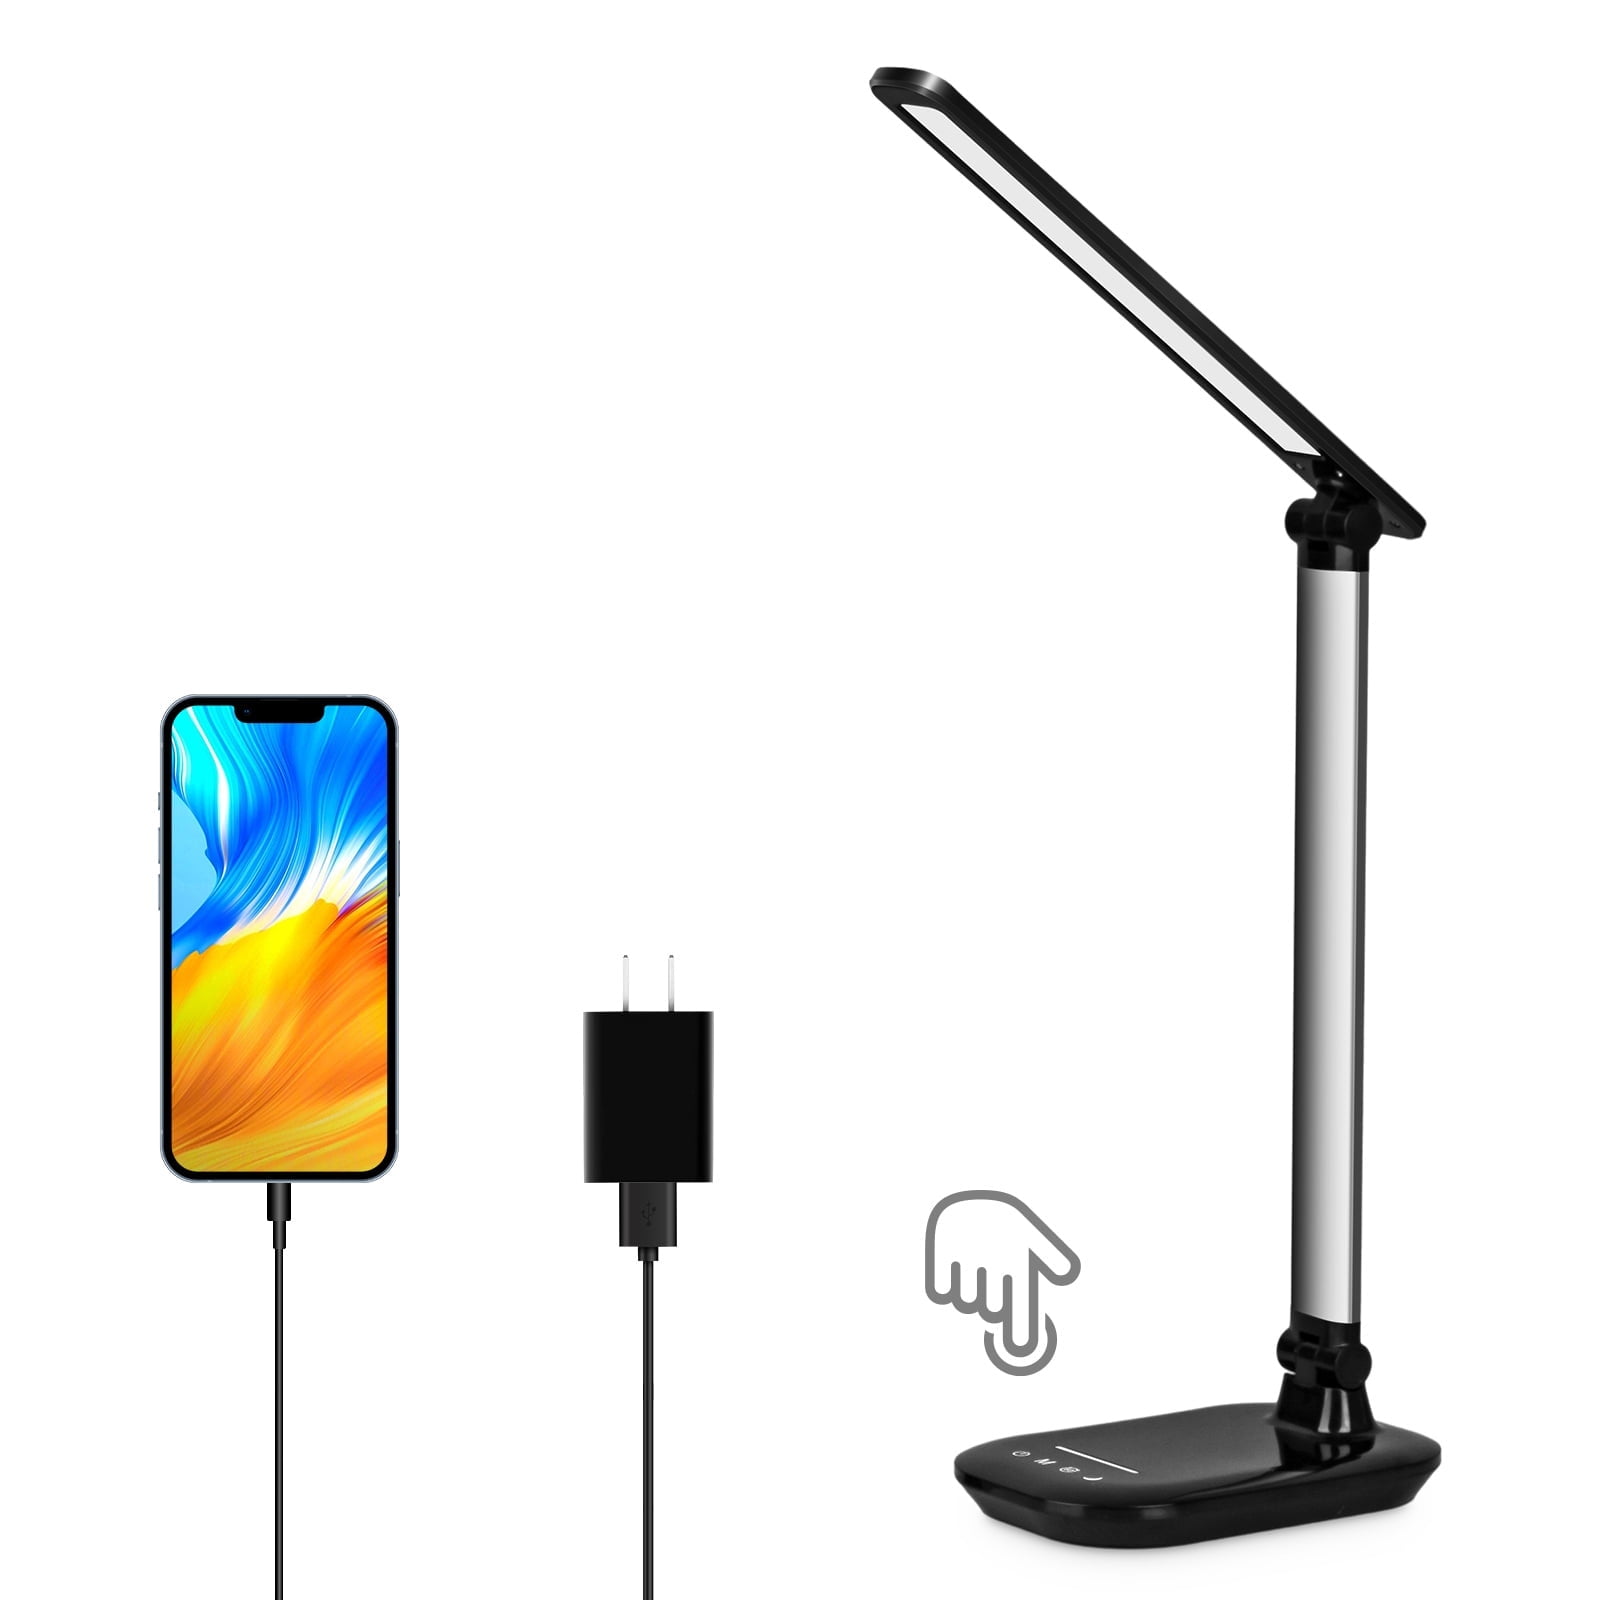 EJWQWQE Battery Opeed Table Lamps, Rechargeable Wireless LED Desk Lamp With  Touc H, 3-Level Brightness Light, USB Eye Protection Decoion Night Lamps